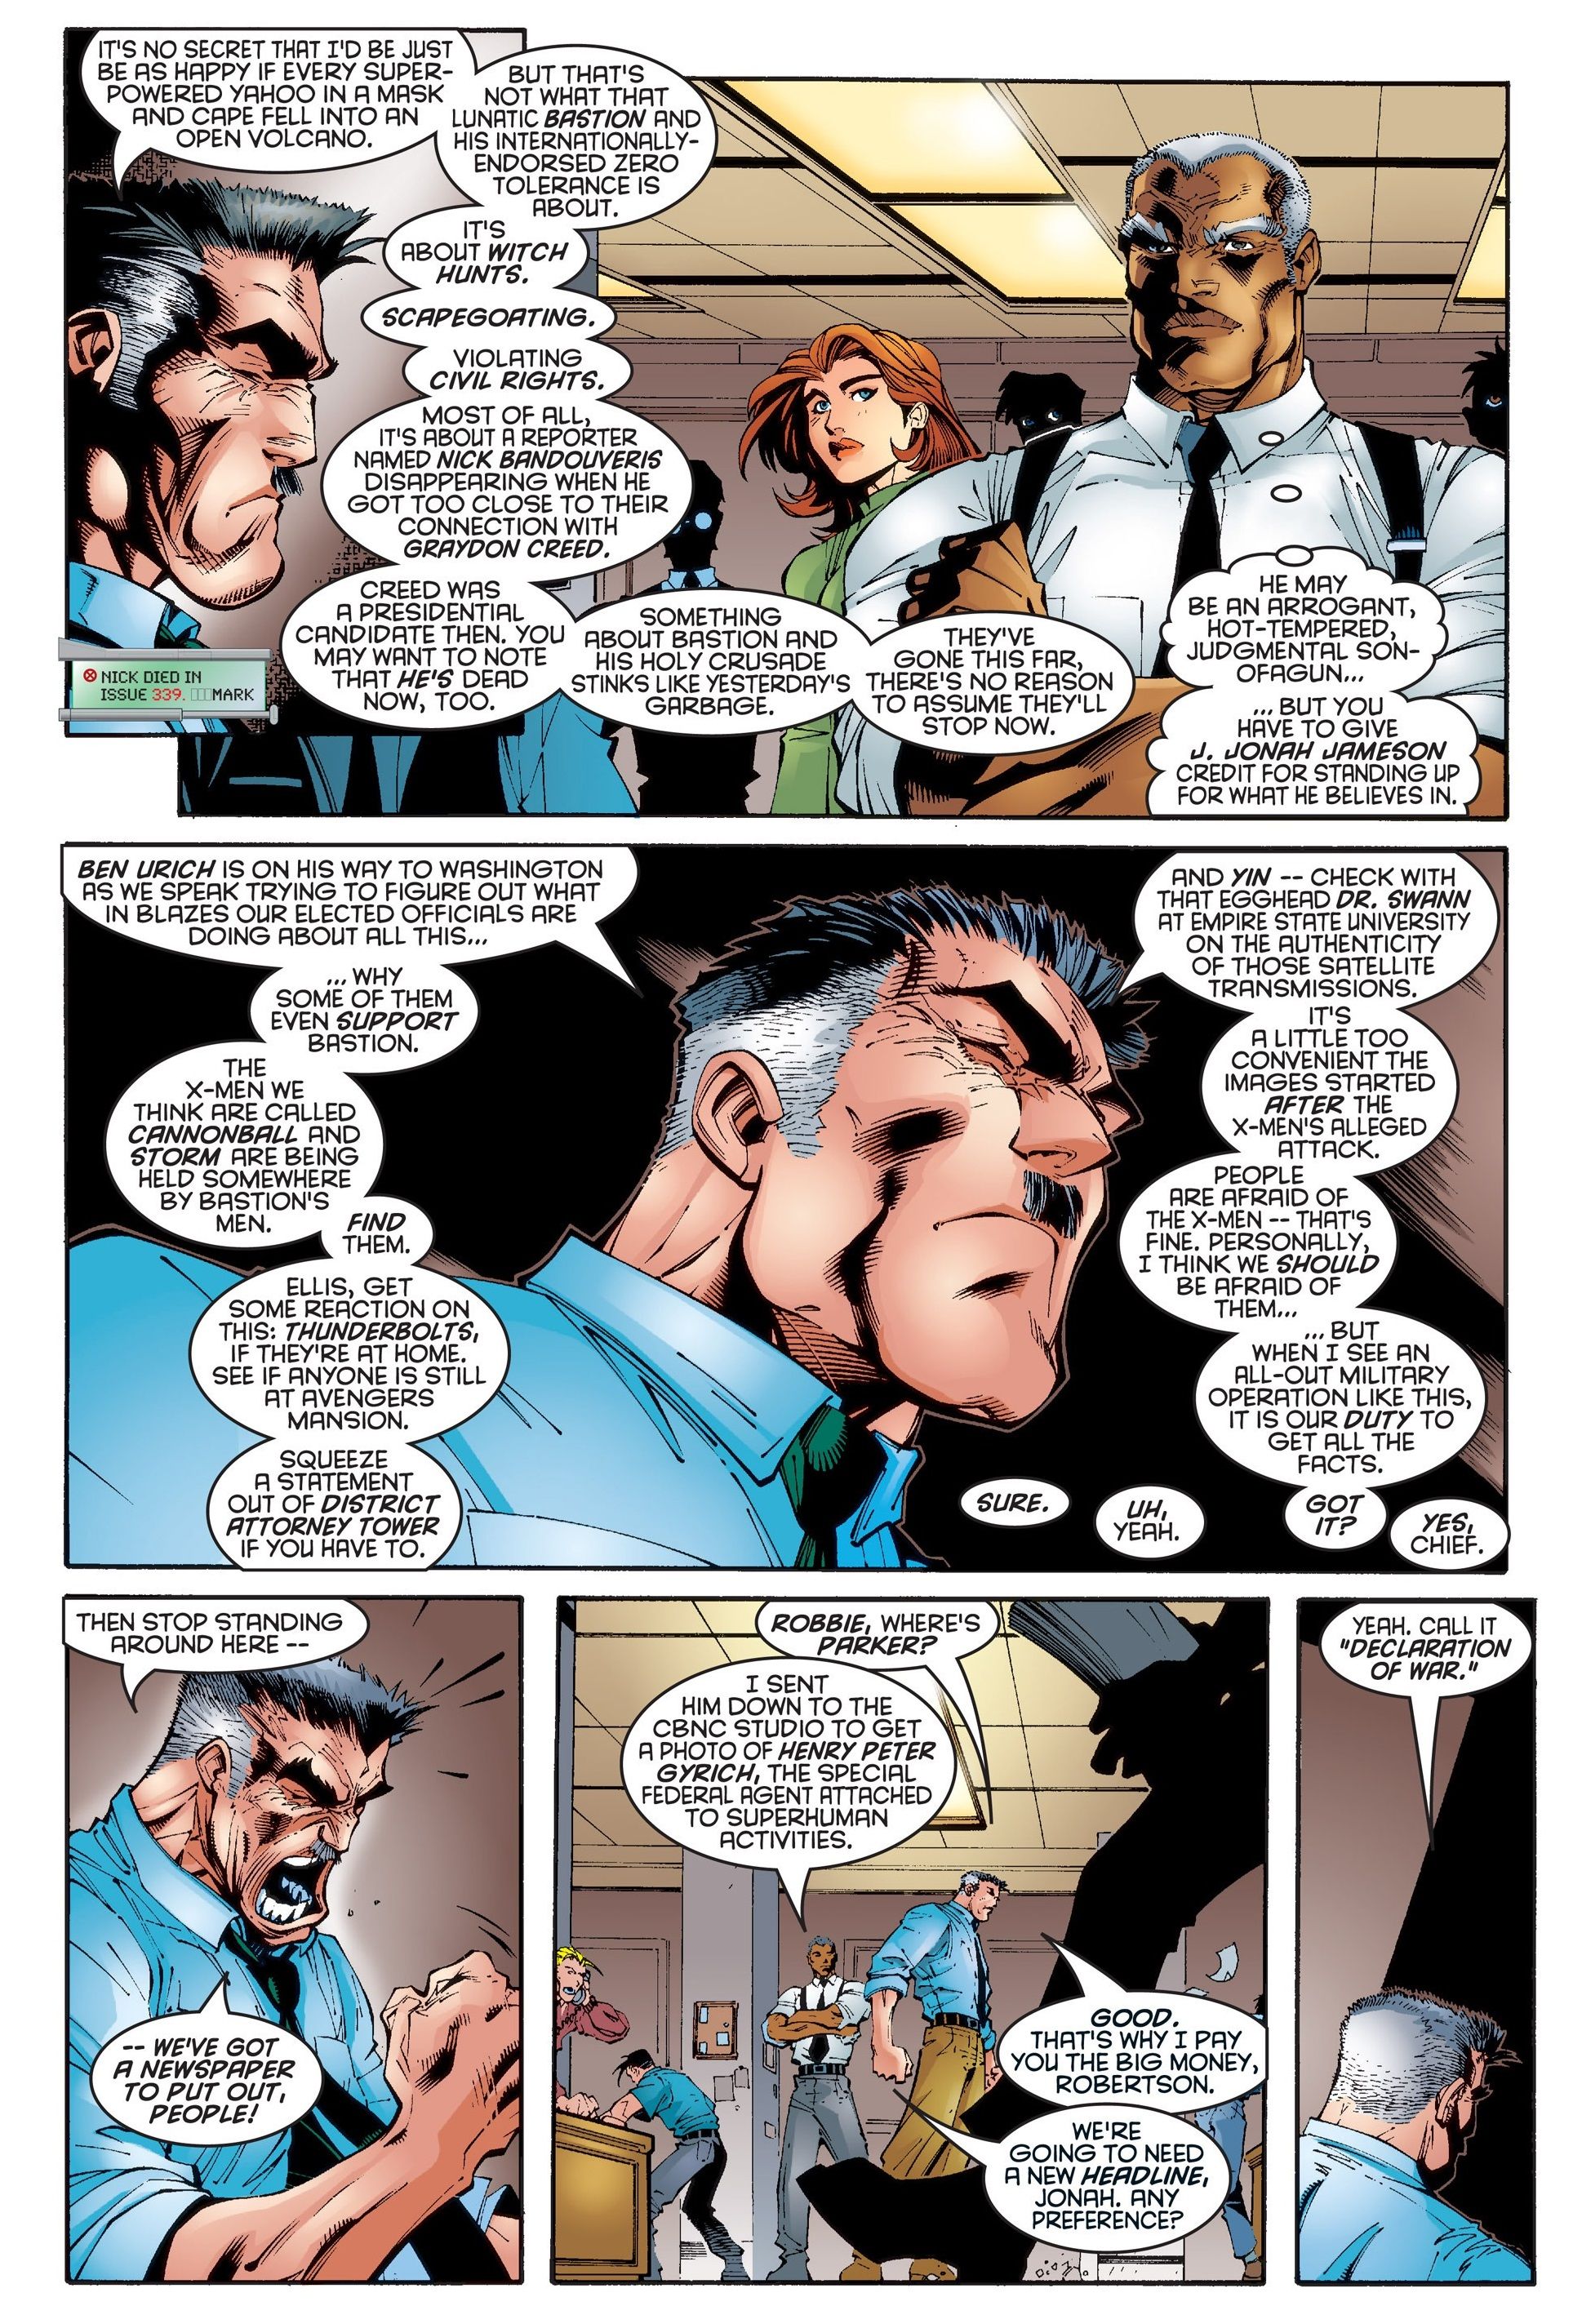 X-Men '97's Bastion Once Made J. Jonah Jameson the Hero of the Story